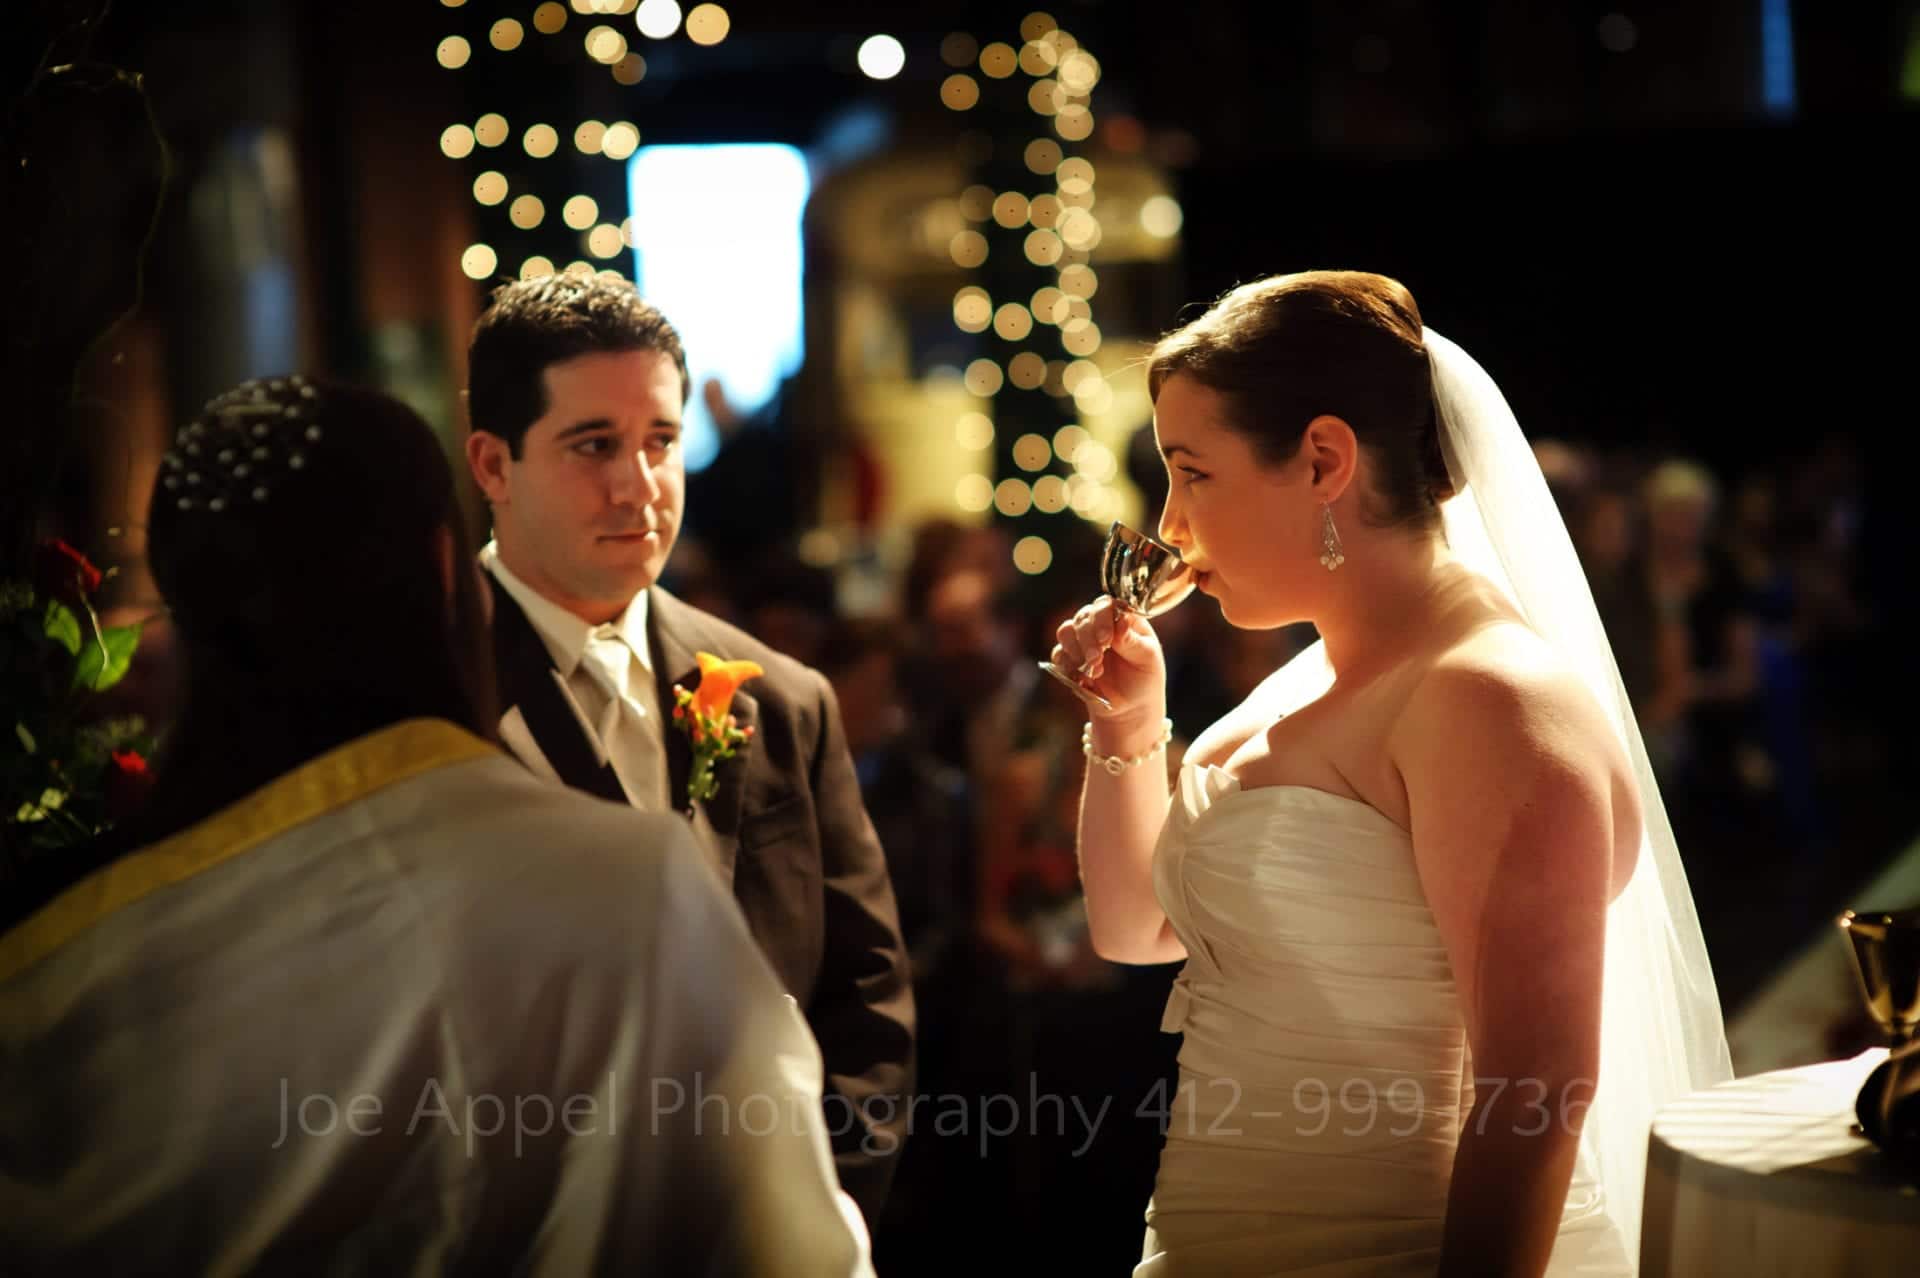 Bride drinks from a kiddush cup during her wedding ceremony in the Great Hall at the Heinz History Center